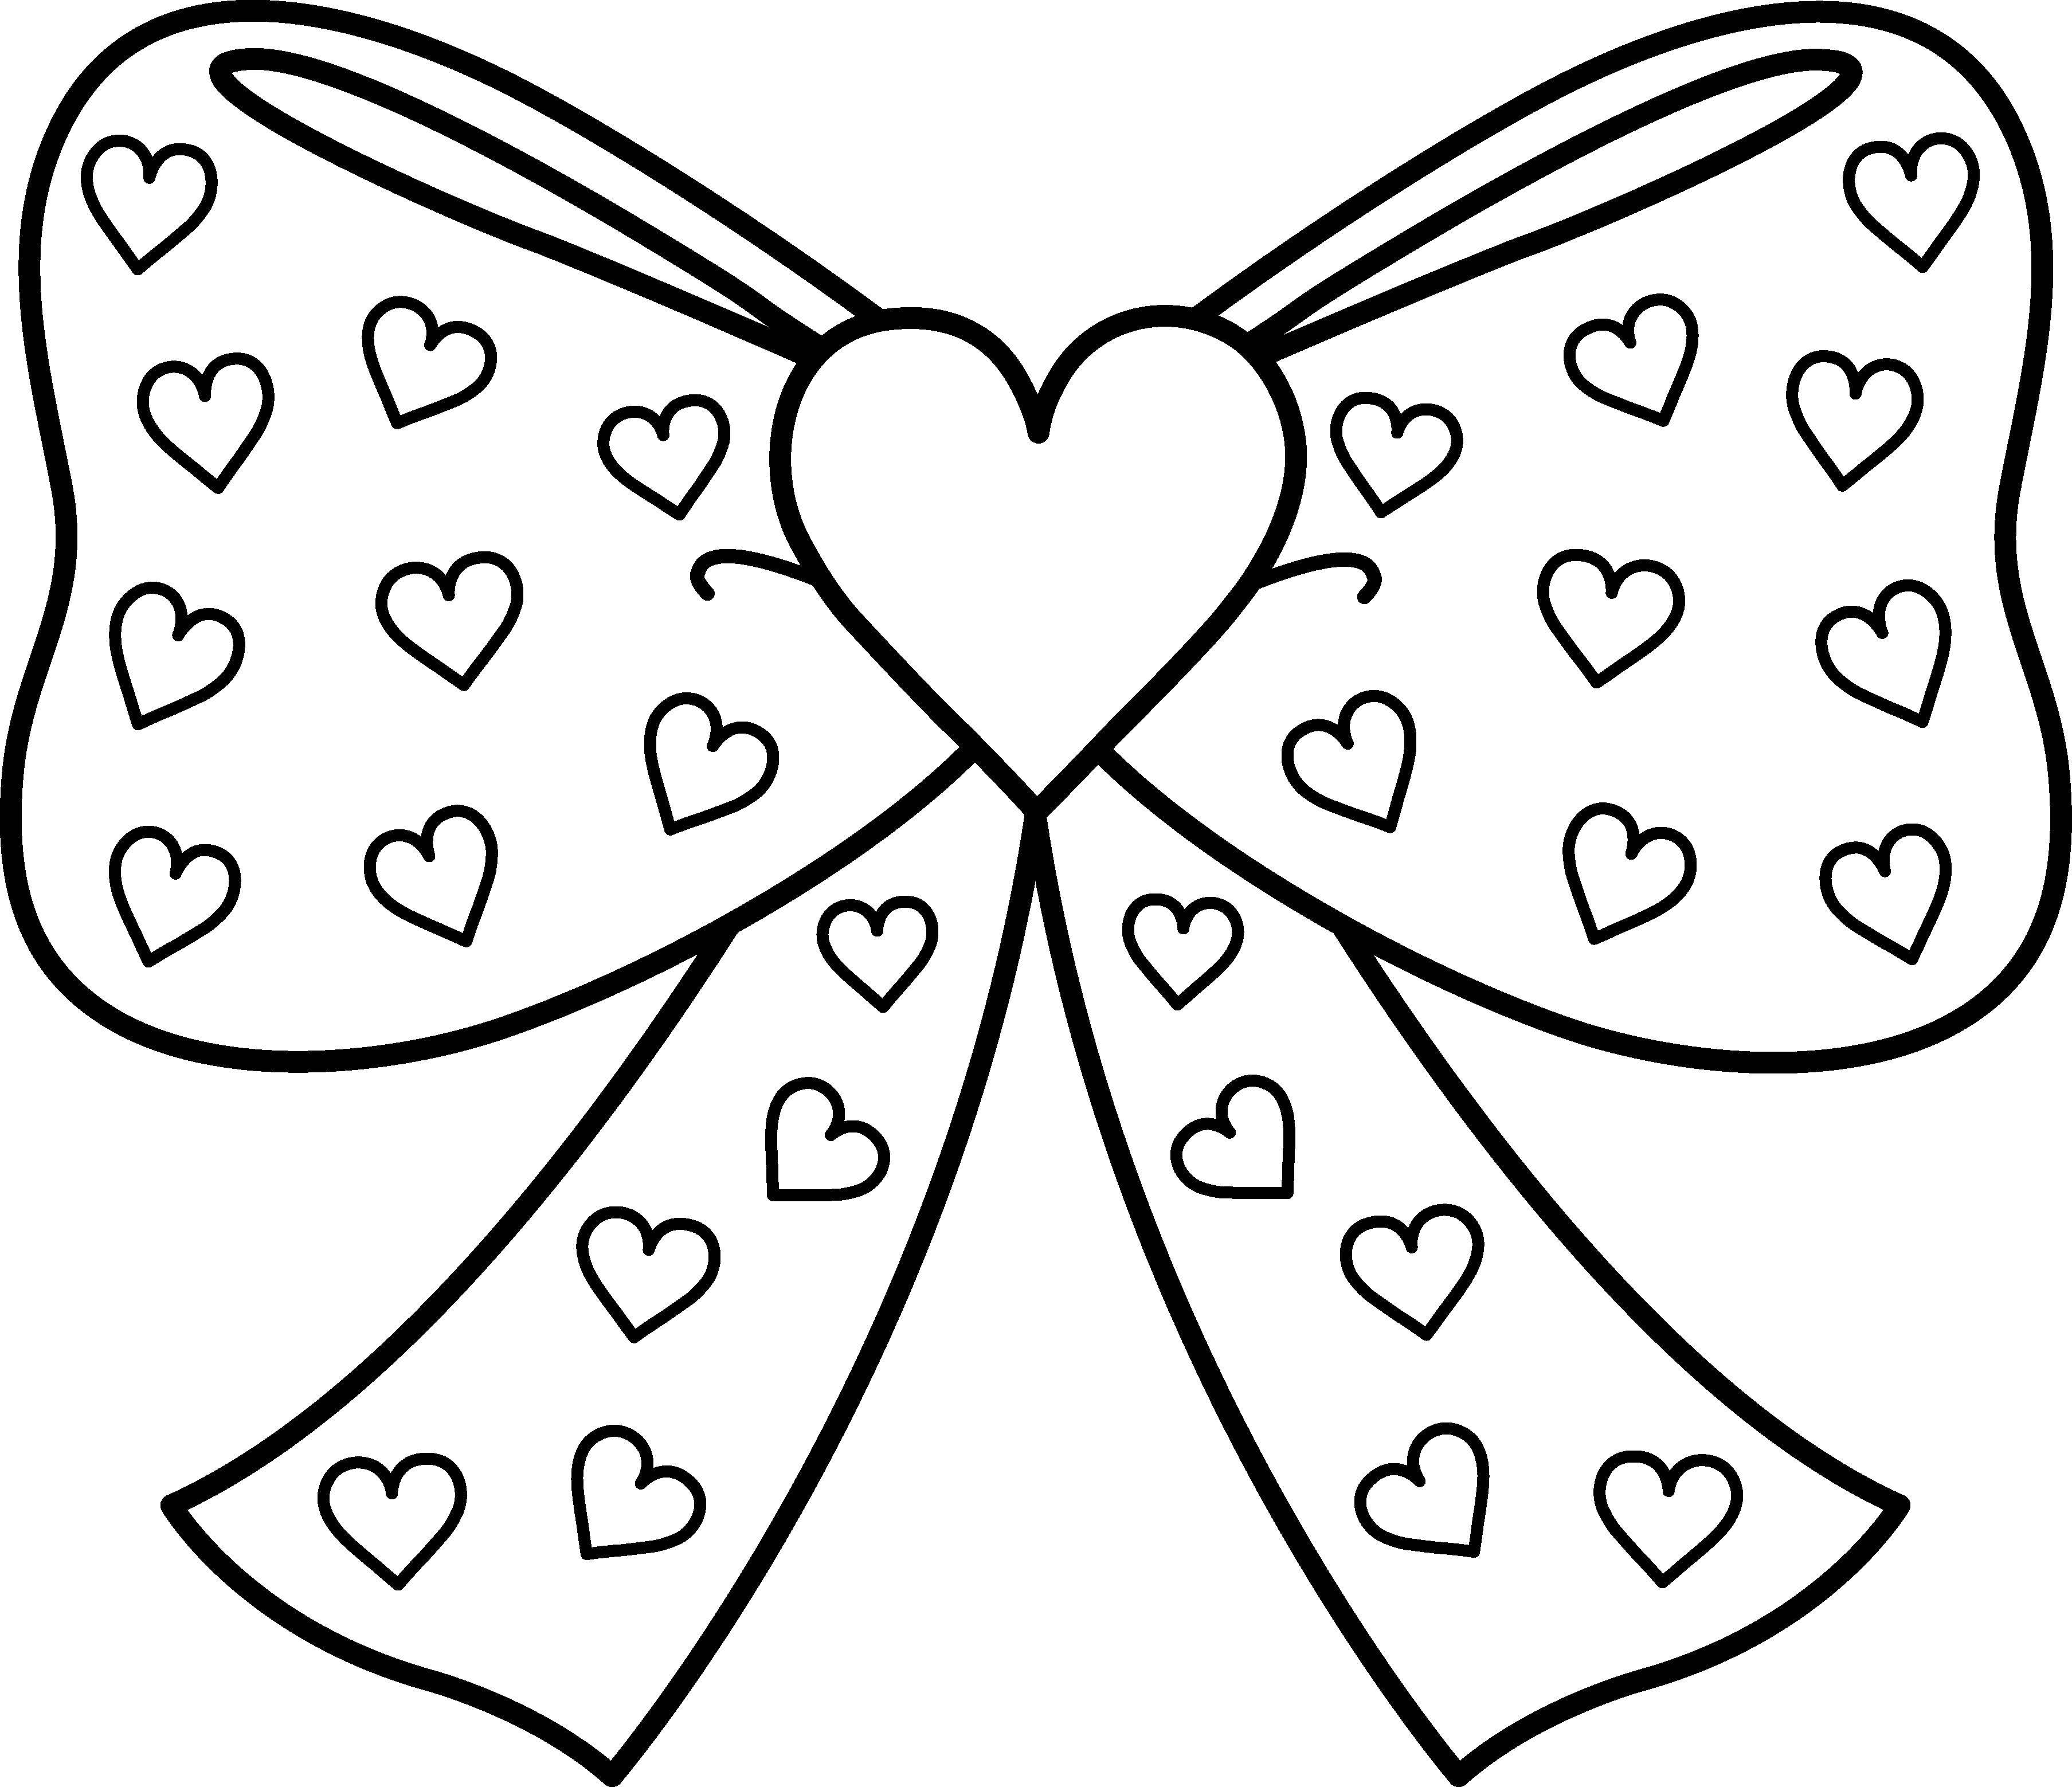 Coloring Bow. Category I love you. Tags:  heart, bow, love.